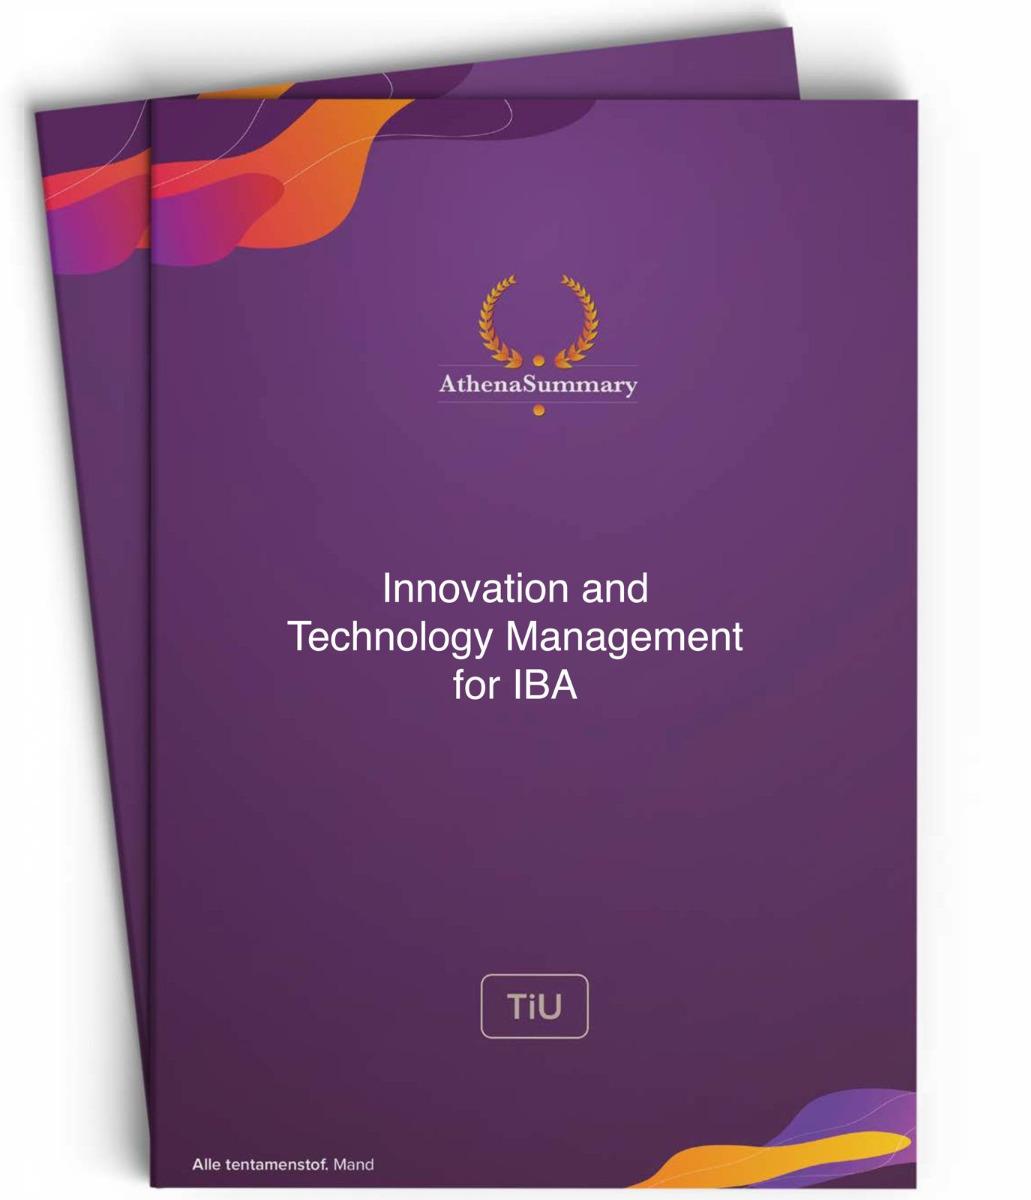 Literature and Lecture Summary: Innovation & Technology Management for IBA